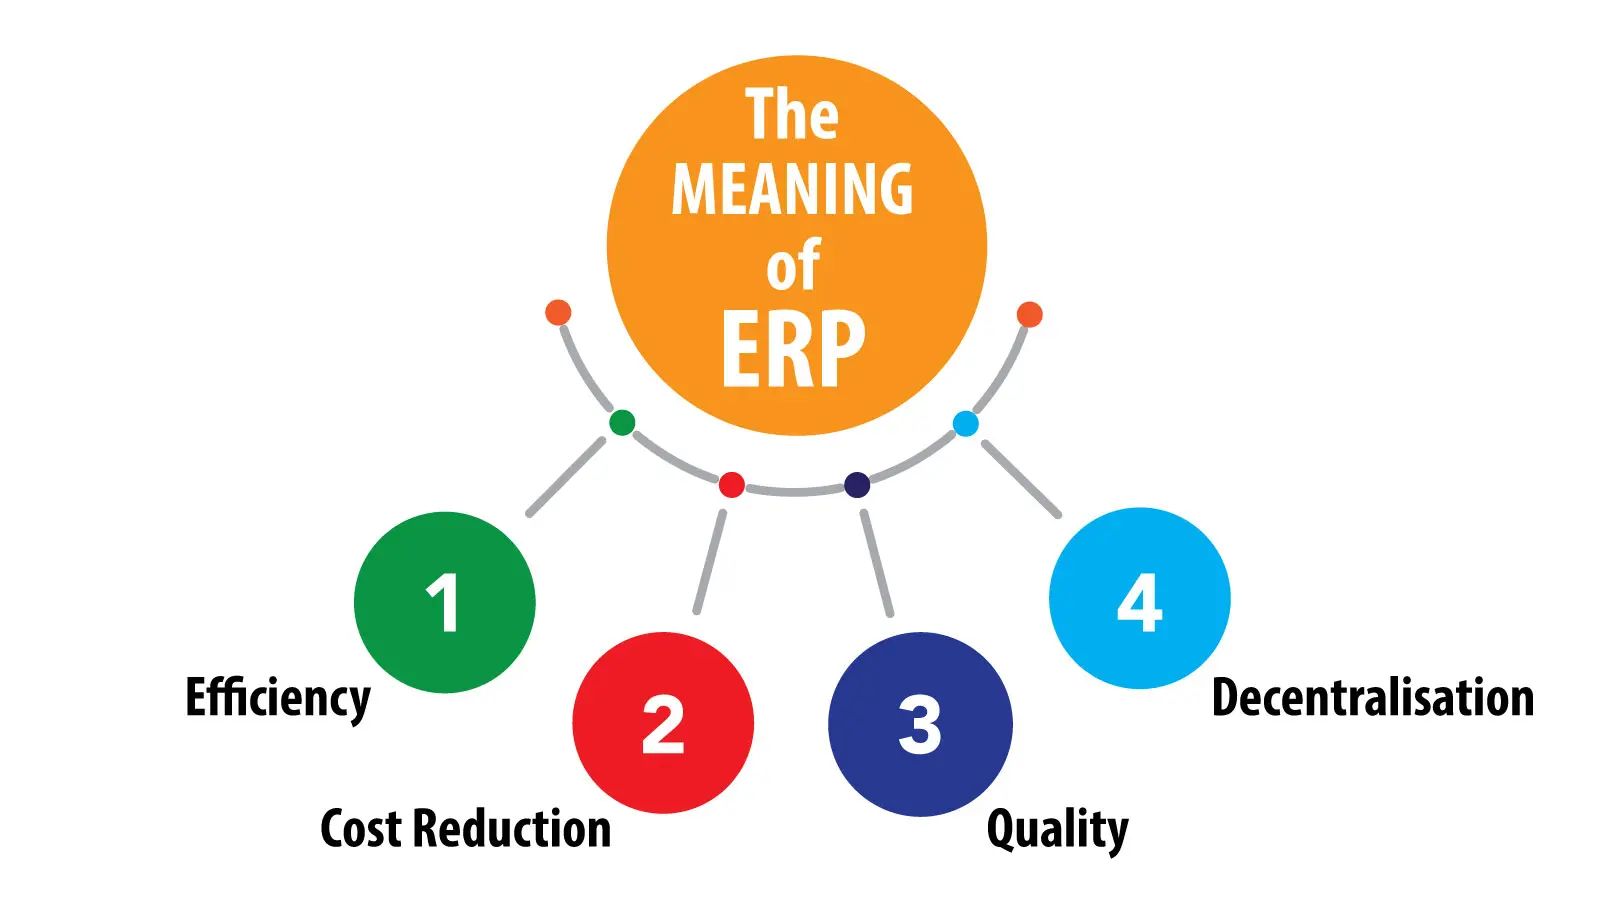 ERP System image